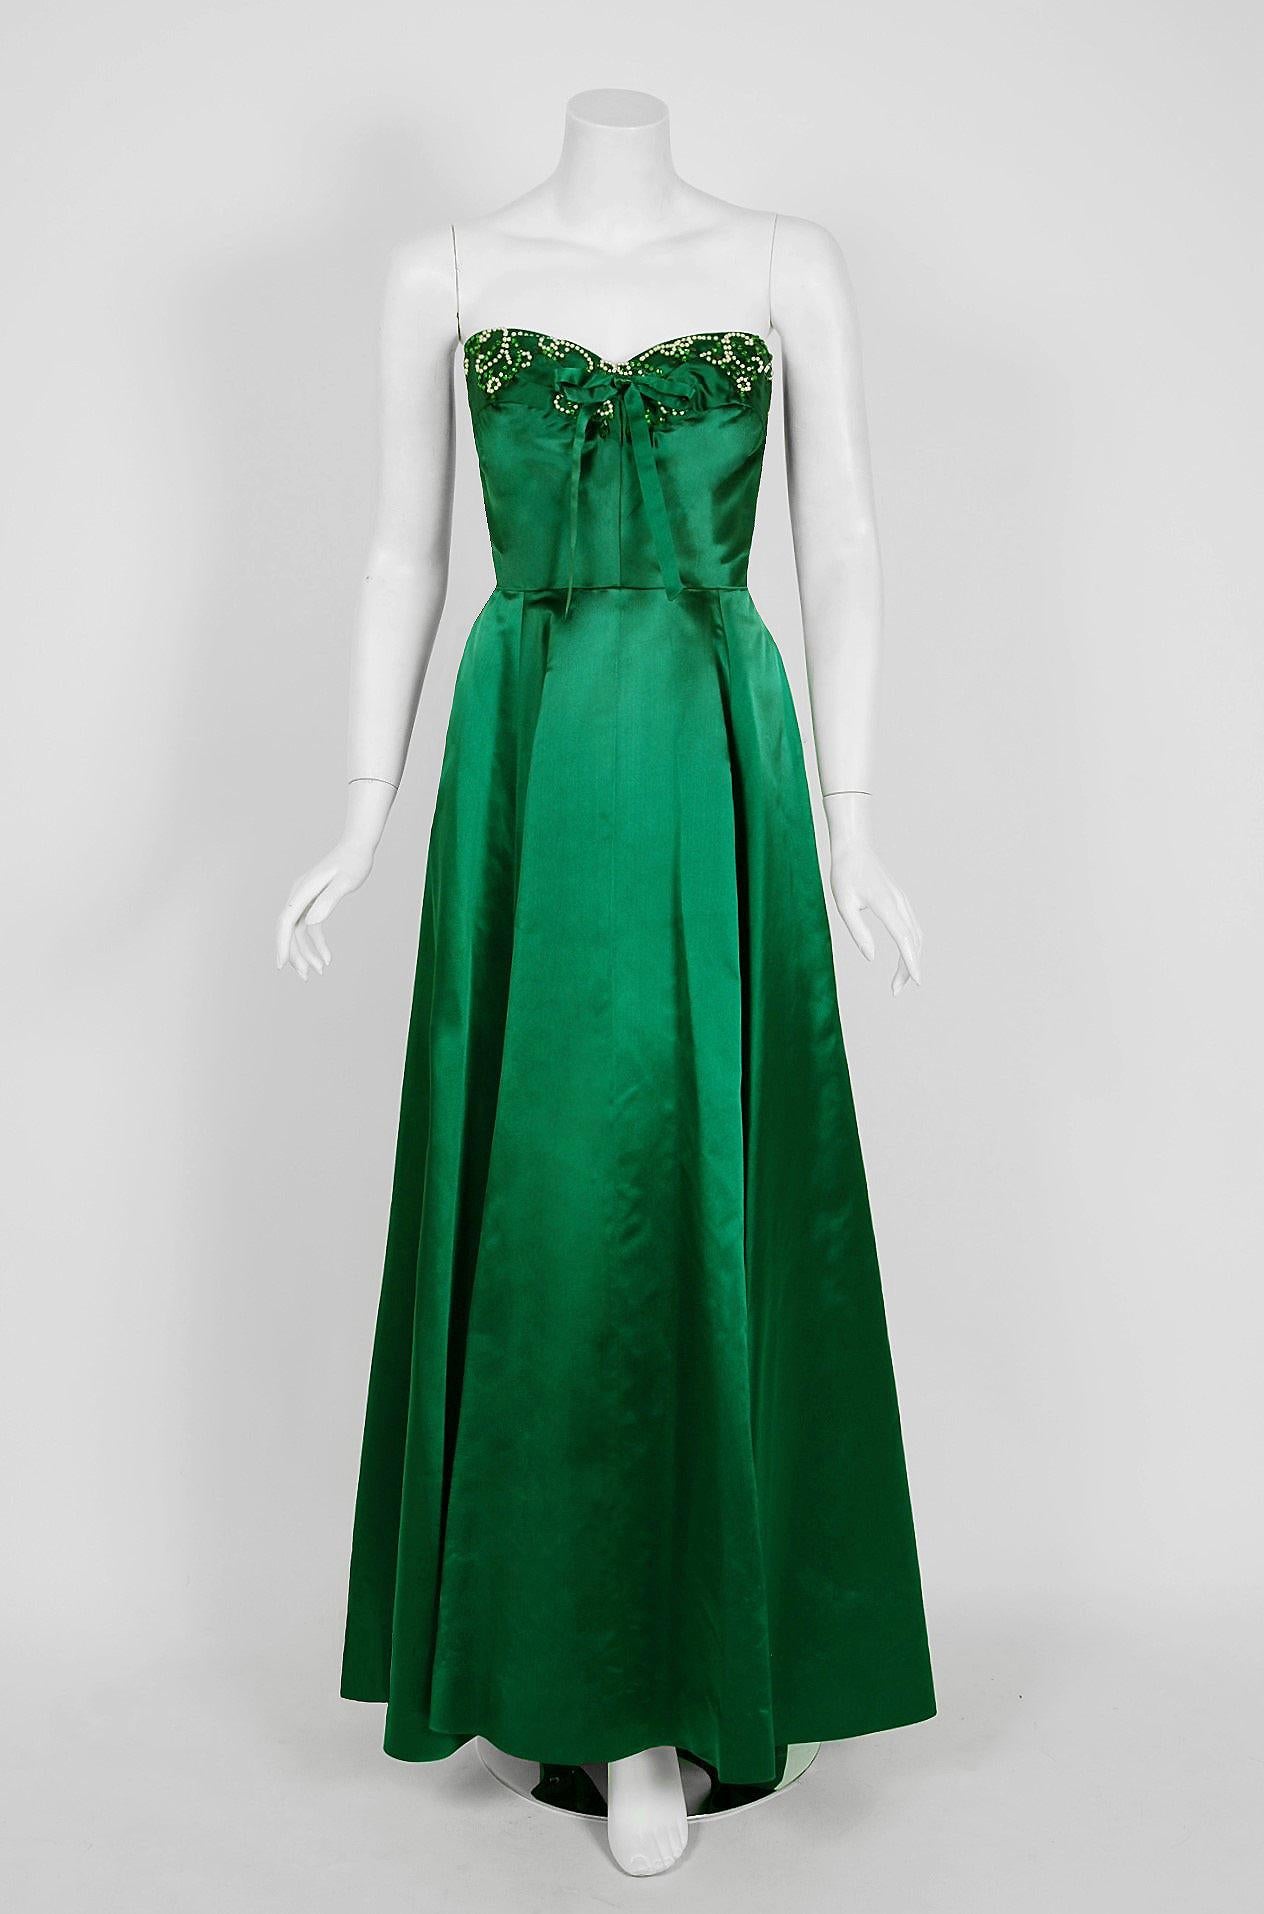 In this gorgeous 1950's Helga designer gown, the detailed construction and meticulous attention to detail are comparable to what you will find in modern couture. Helga was established in 1947 by Robert Oppenheimer and his wife Helga Kallman